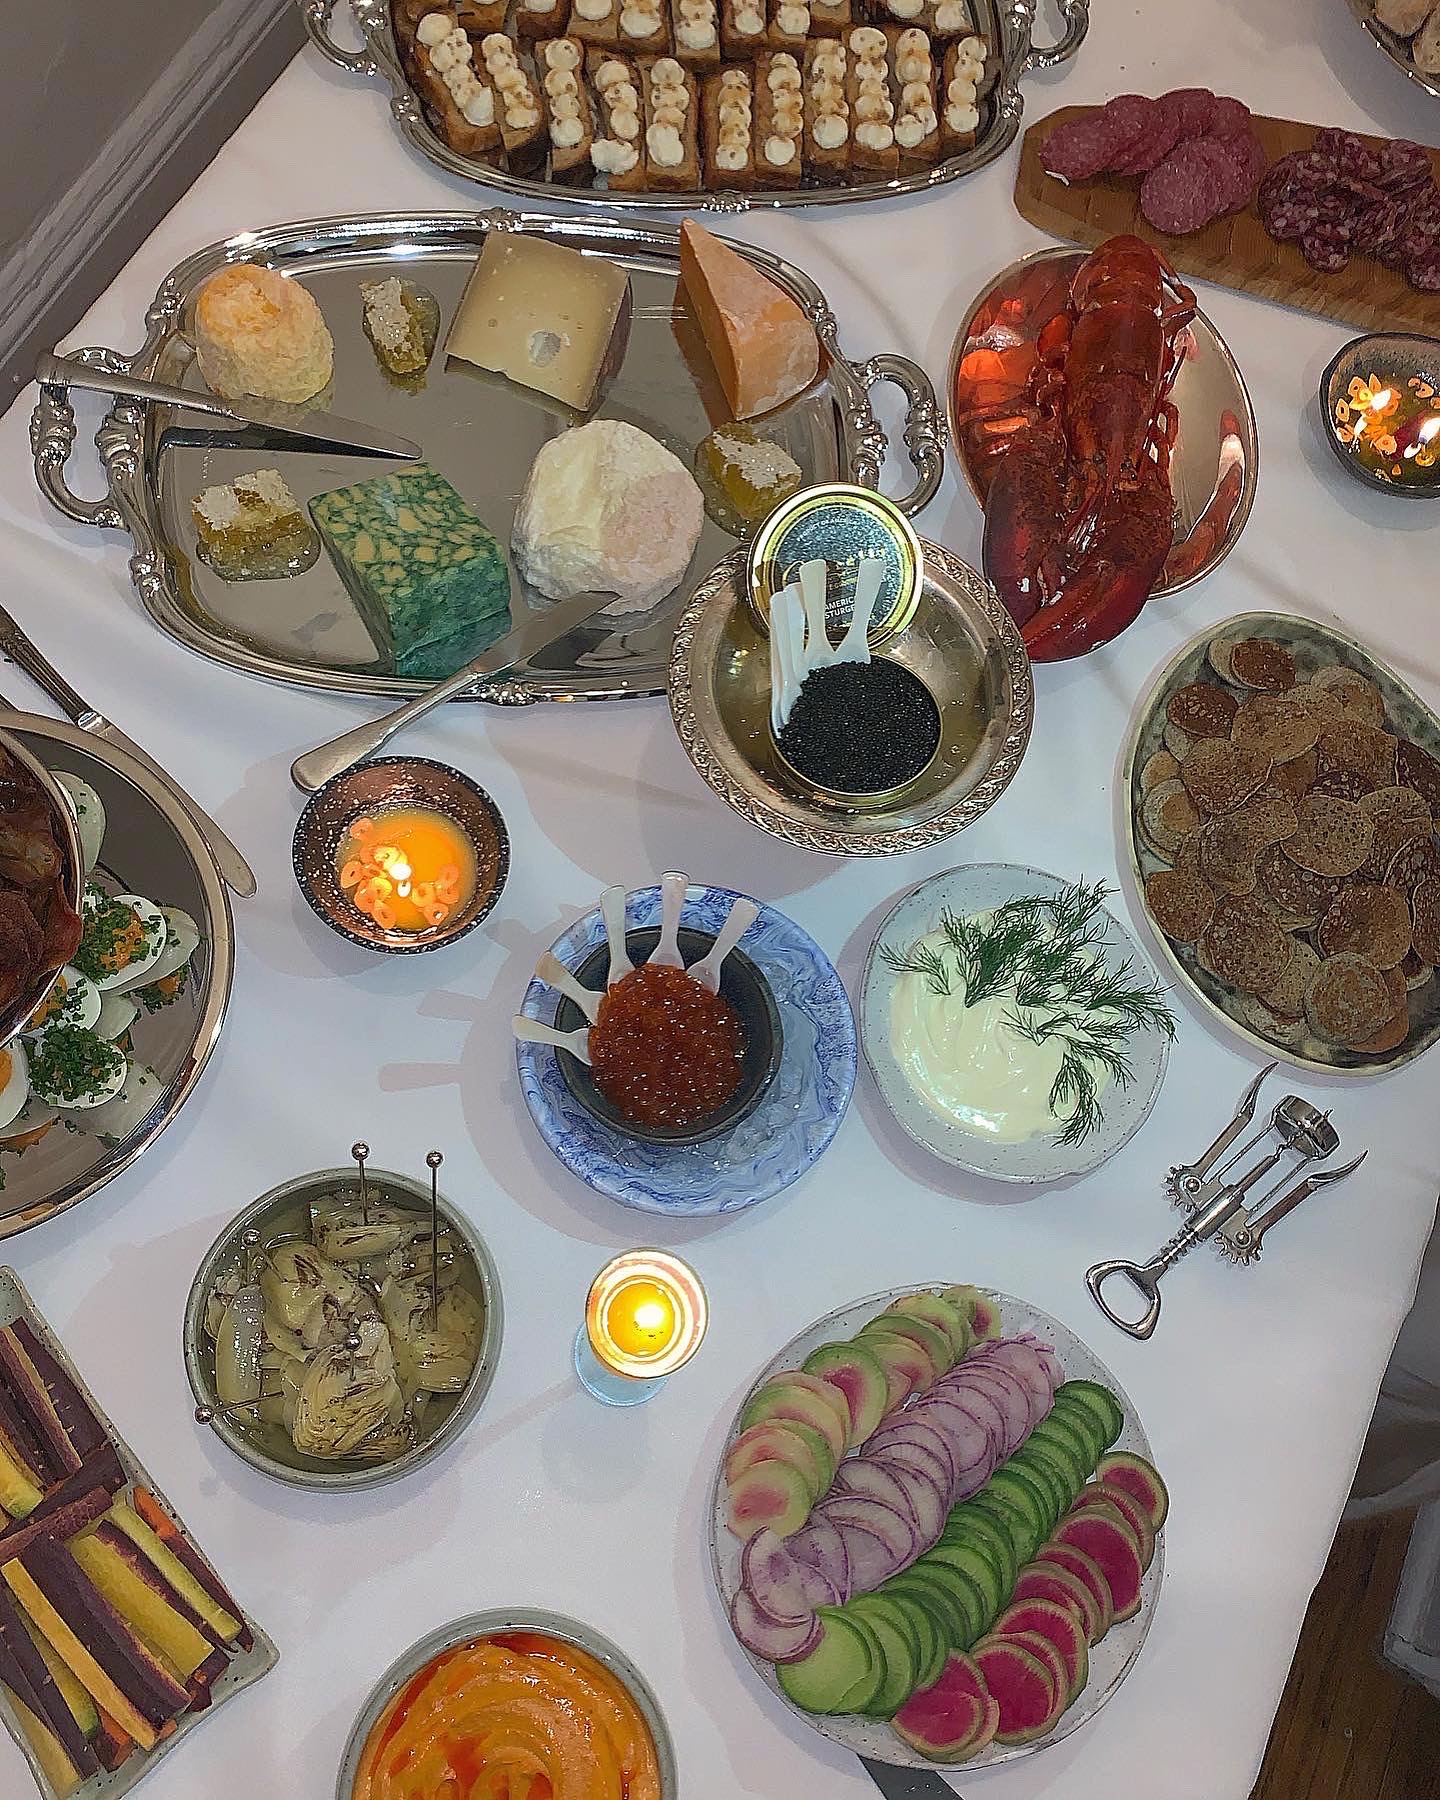 A dinner spread featuring a cheese board, plates of caviar, and crudites on platters arranged on a white tablecloth